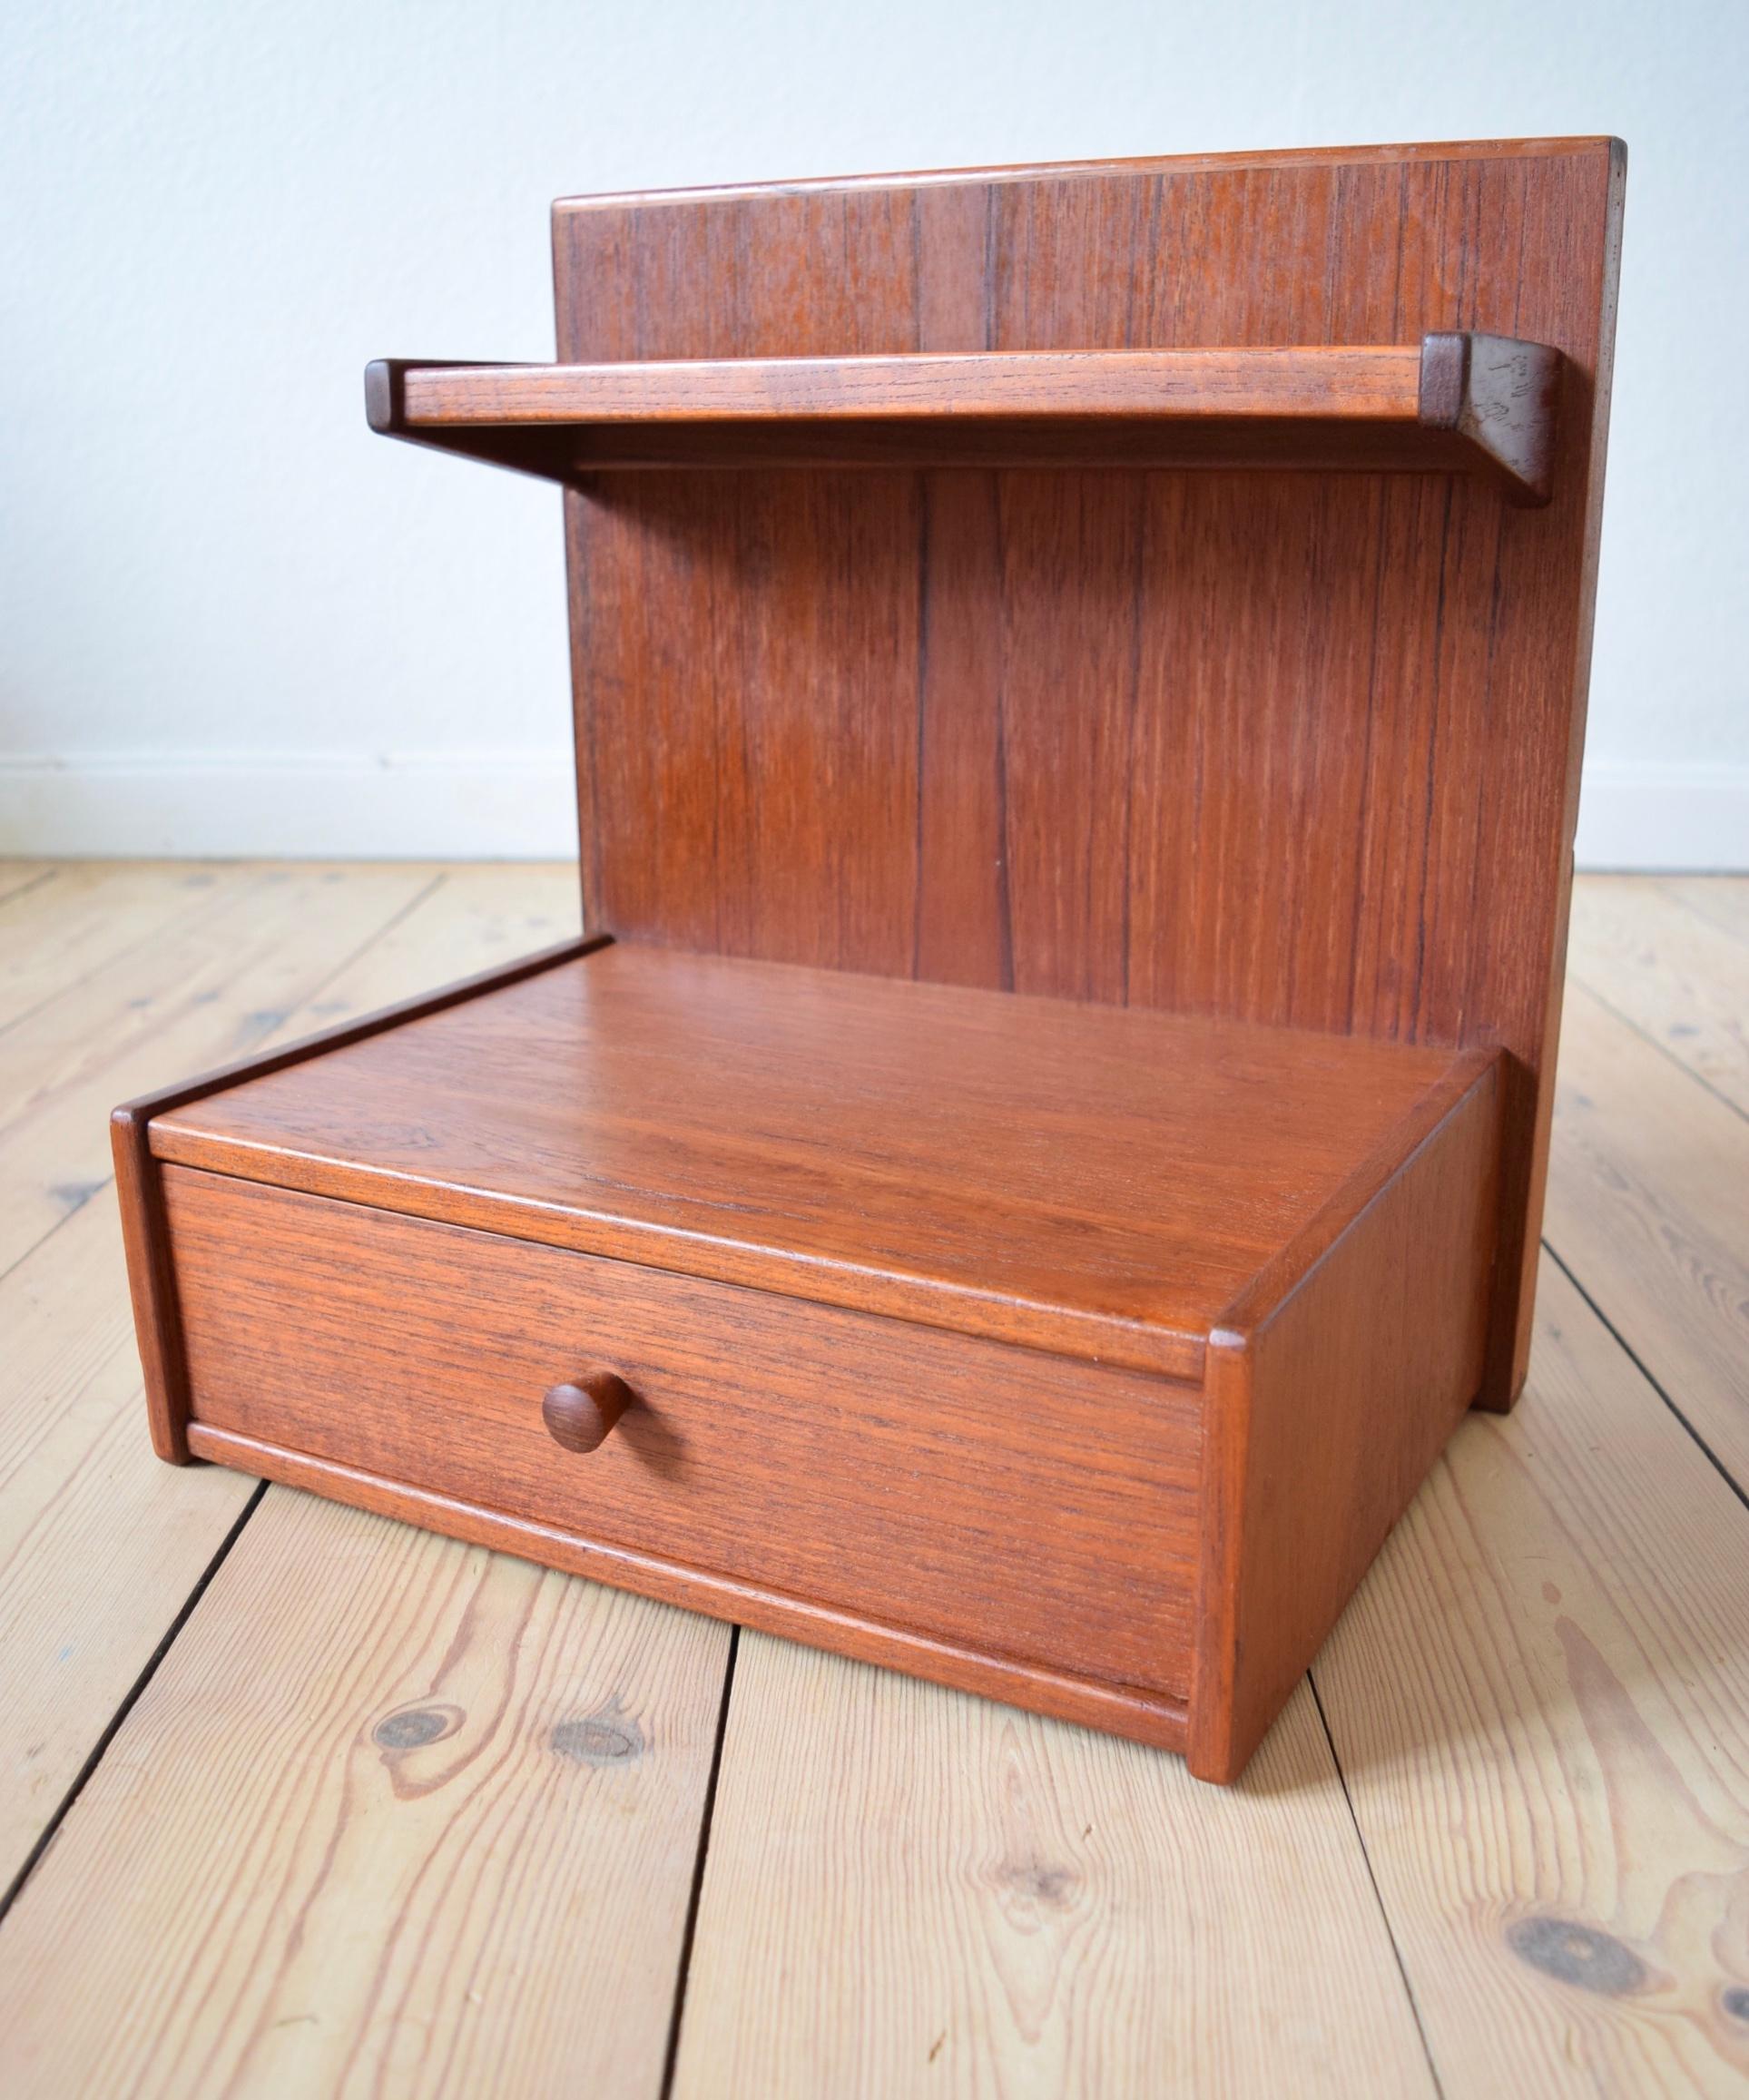 Set of 2 teak night tables manufactured in Denmark in the 1960s. Each unit features a drawer and a Formica topped shelf. The best materials have been used in the production of these tables with solid teak used in the drawer and shelf section.
